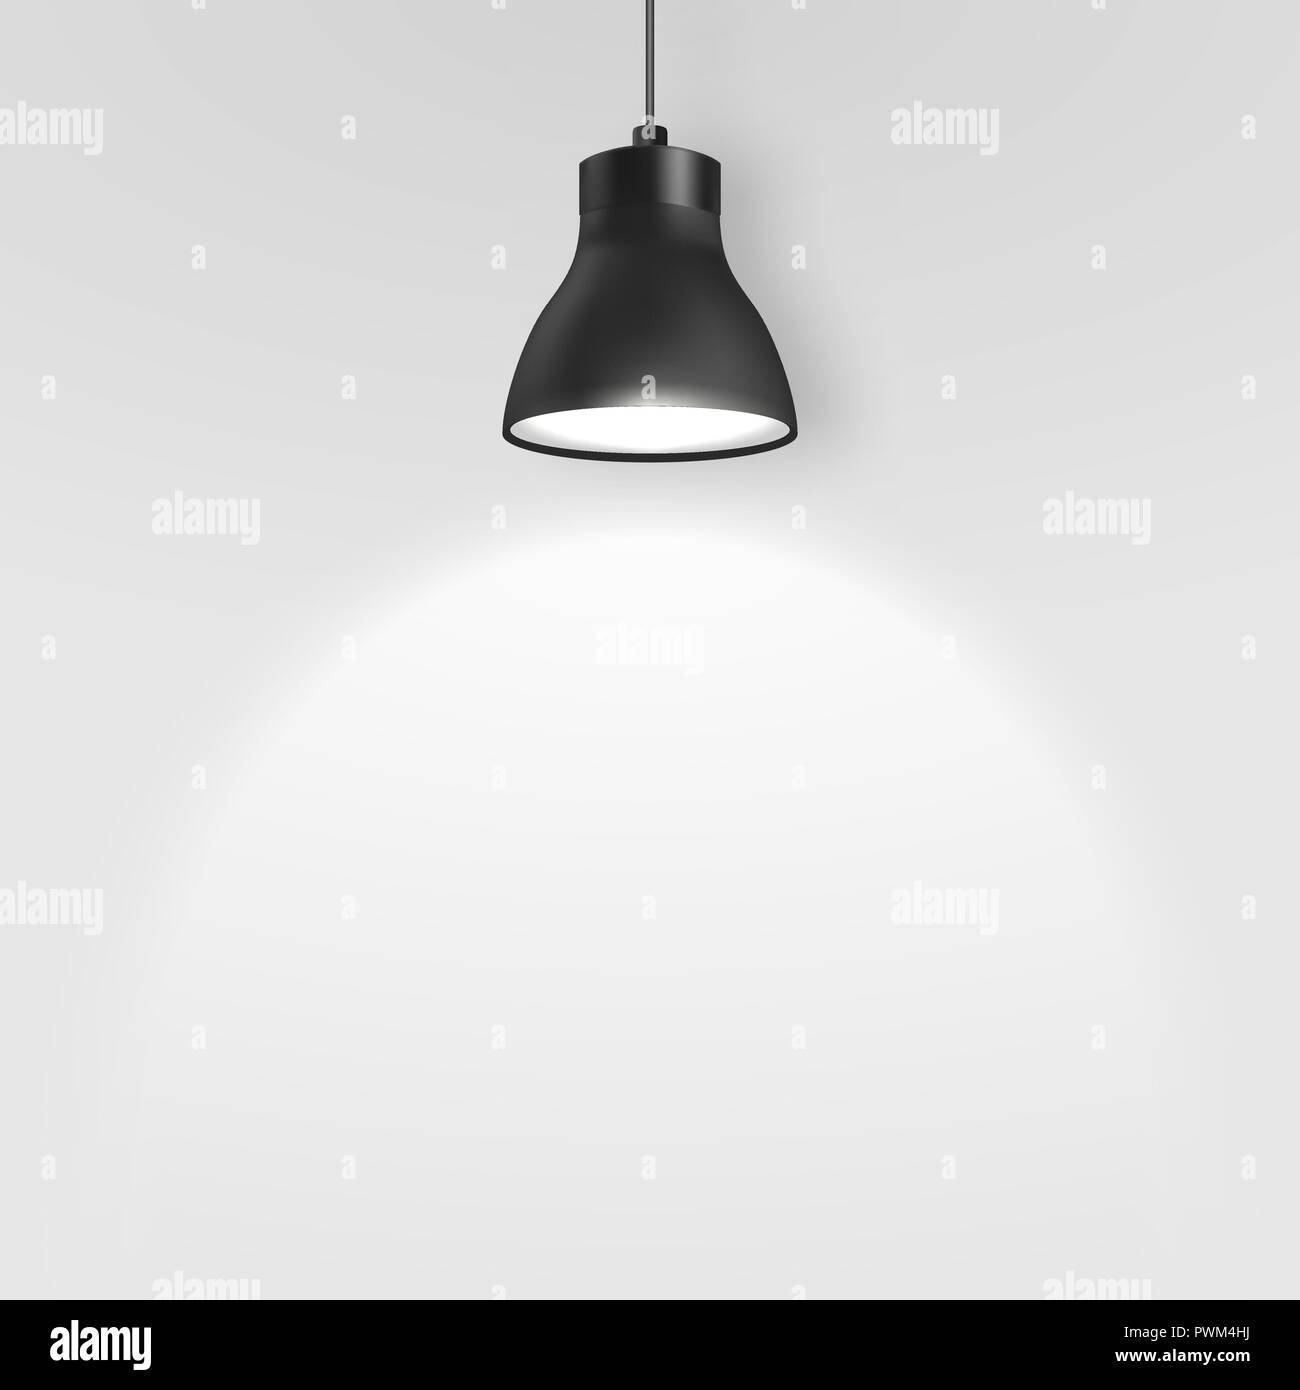 Gewoon Vuil opmerking Vector Realistic 3d Black Spotlight, Hang Ceiling Lamp or Chandelier on  Rope Illuminating the Wall Under